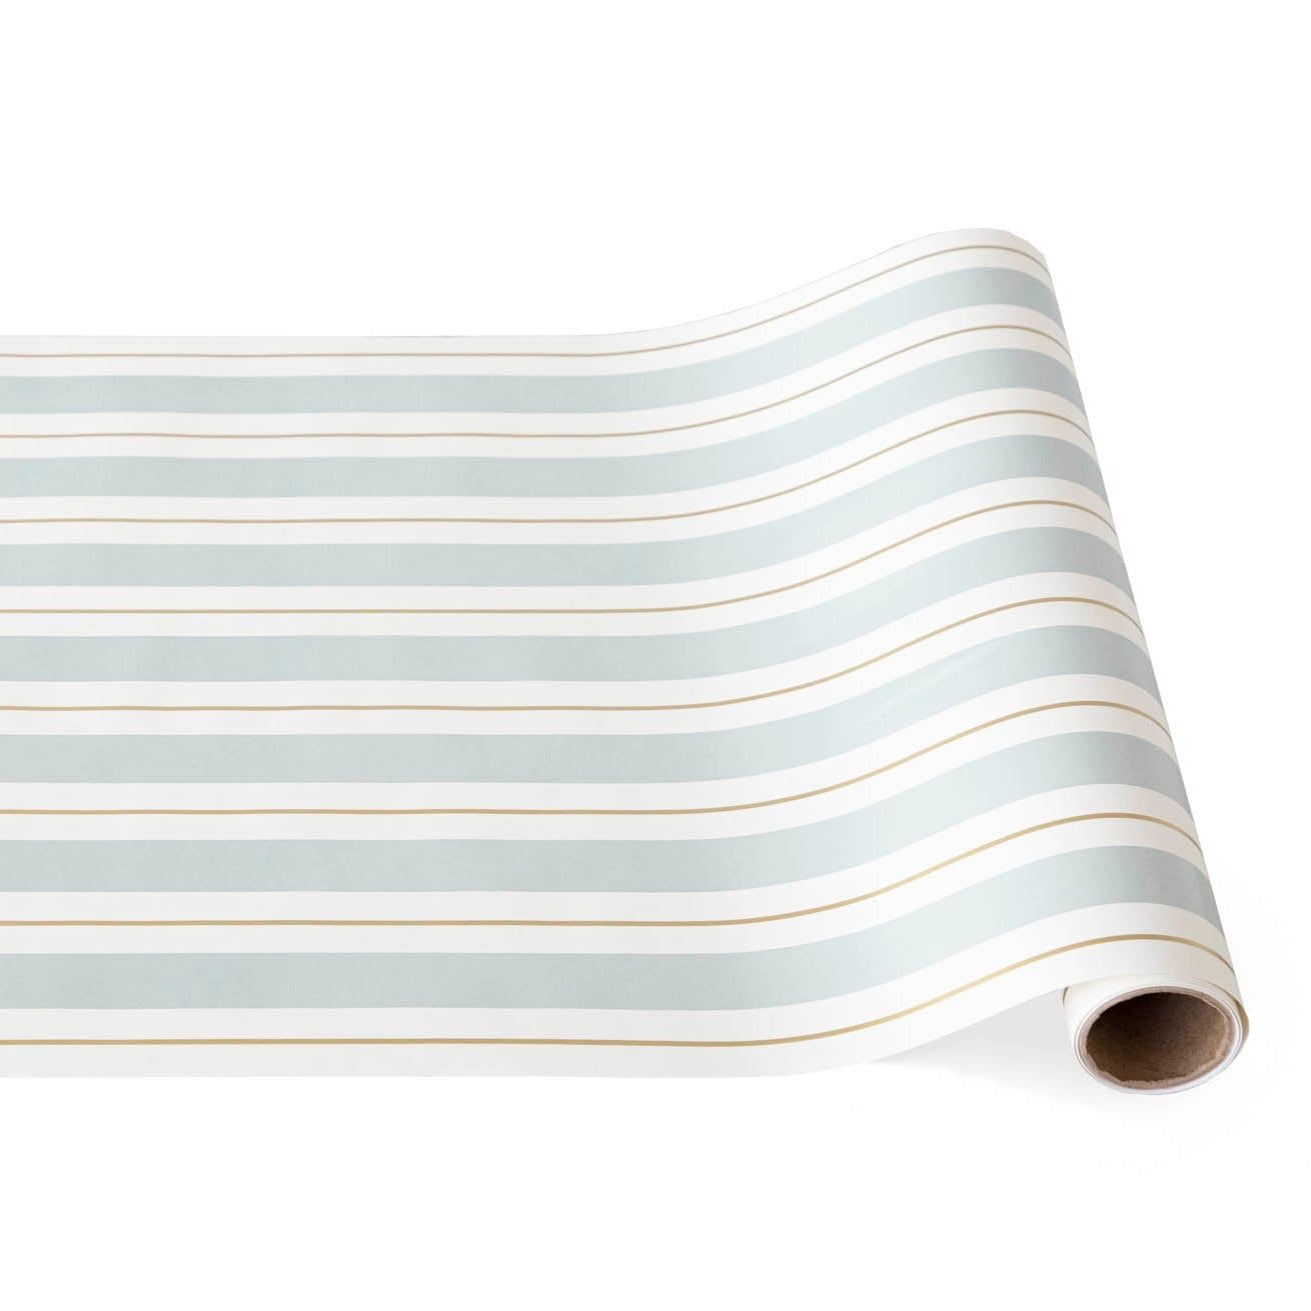 A Slate &amp; Gold Awning Stripe Runner by Hester &amp; Cook adds a touch of elegance to any entertaining event, beautifully accentuating a white surface.